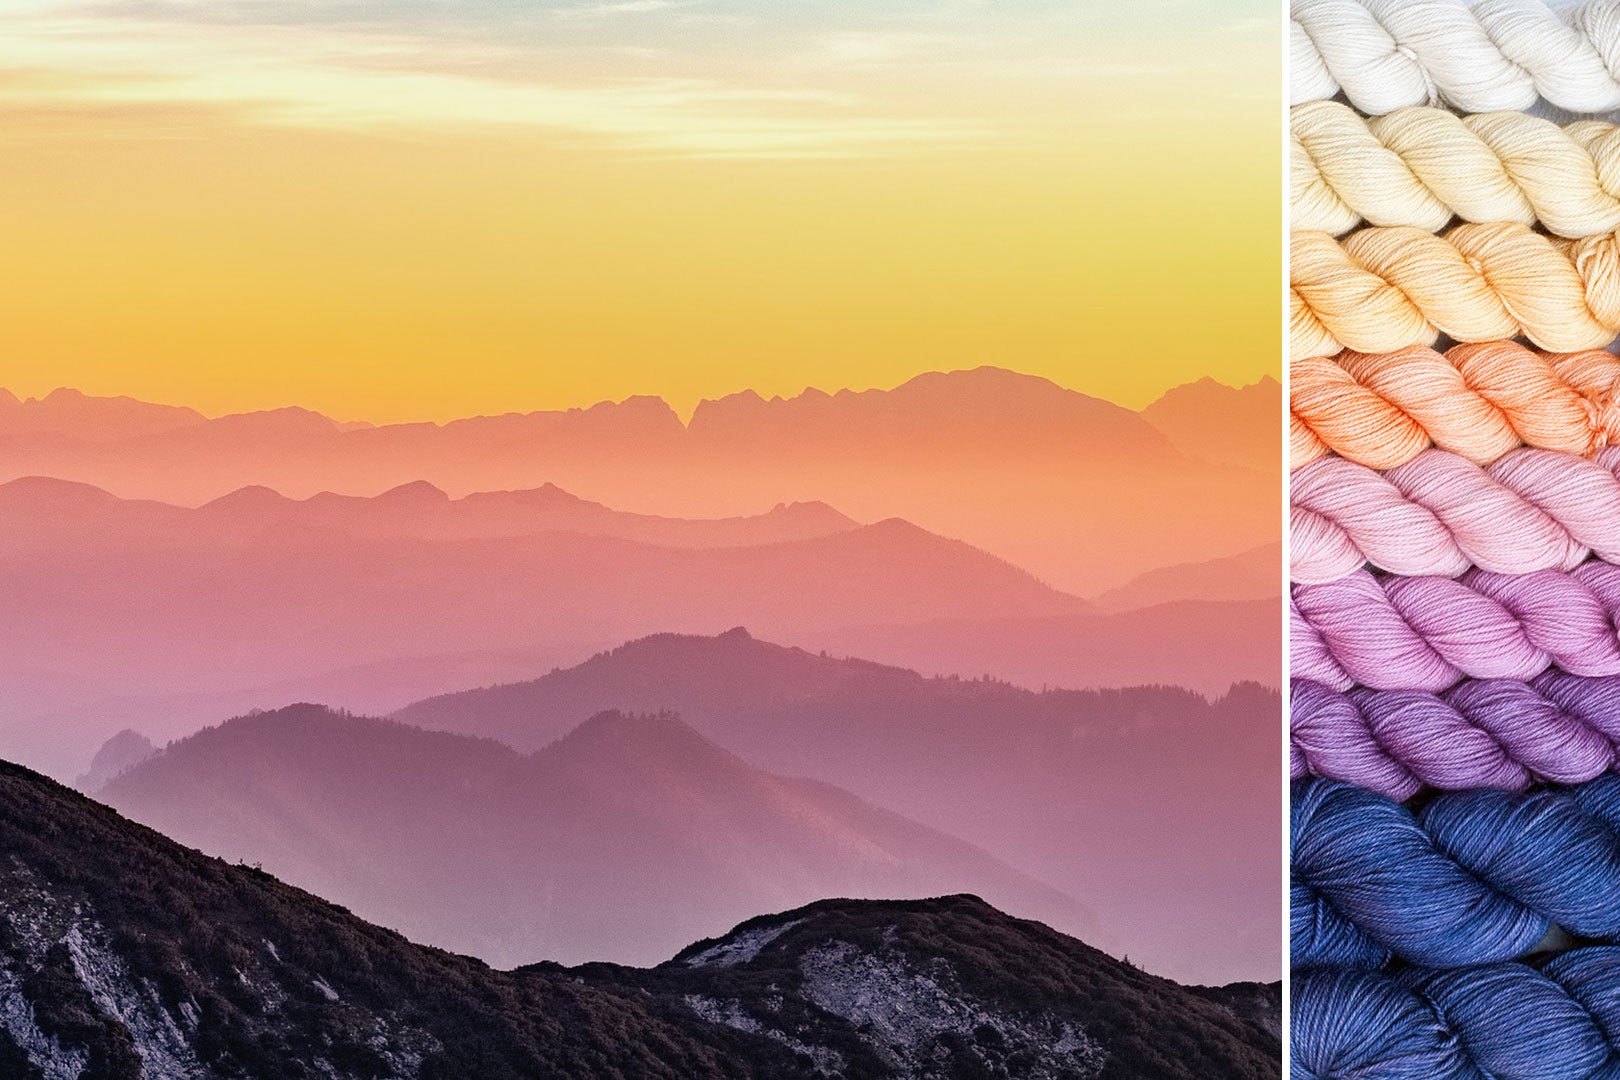 Collage with inspiration image (dark mountains in the foreground and a purple sunset over distant peaks) and matching gradient set for mountain musings MKAL 